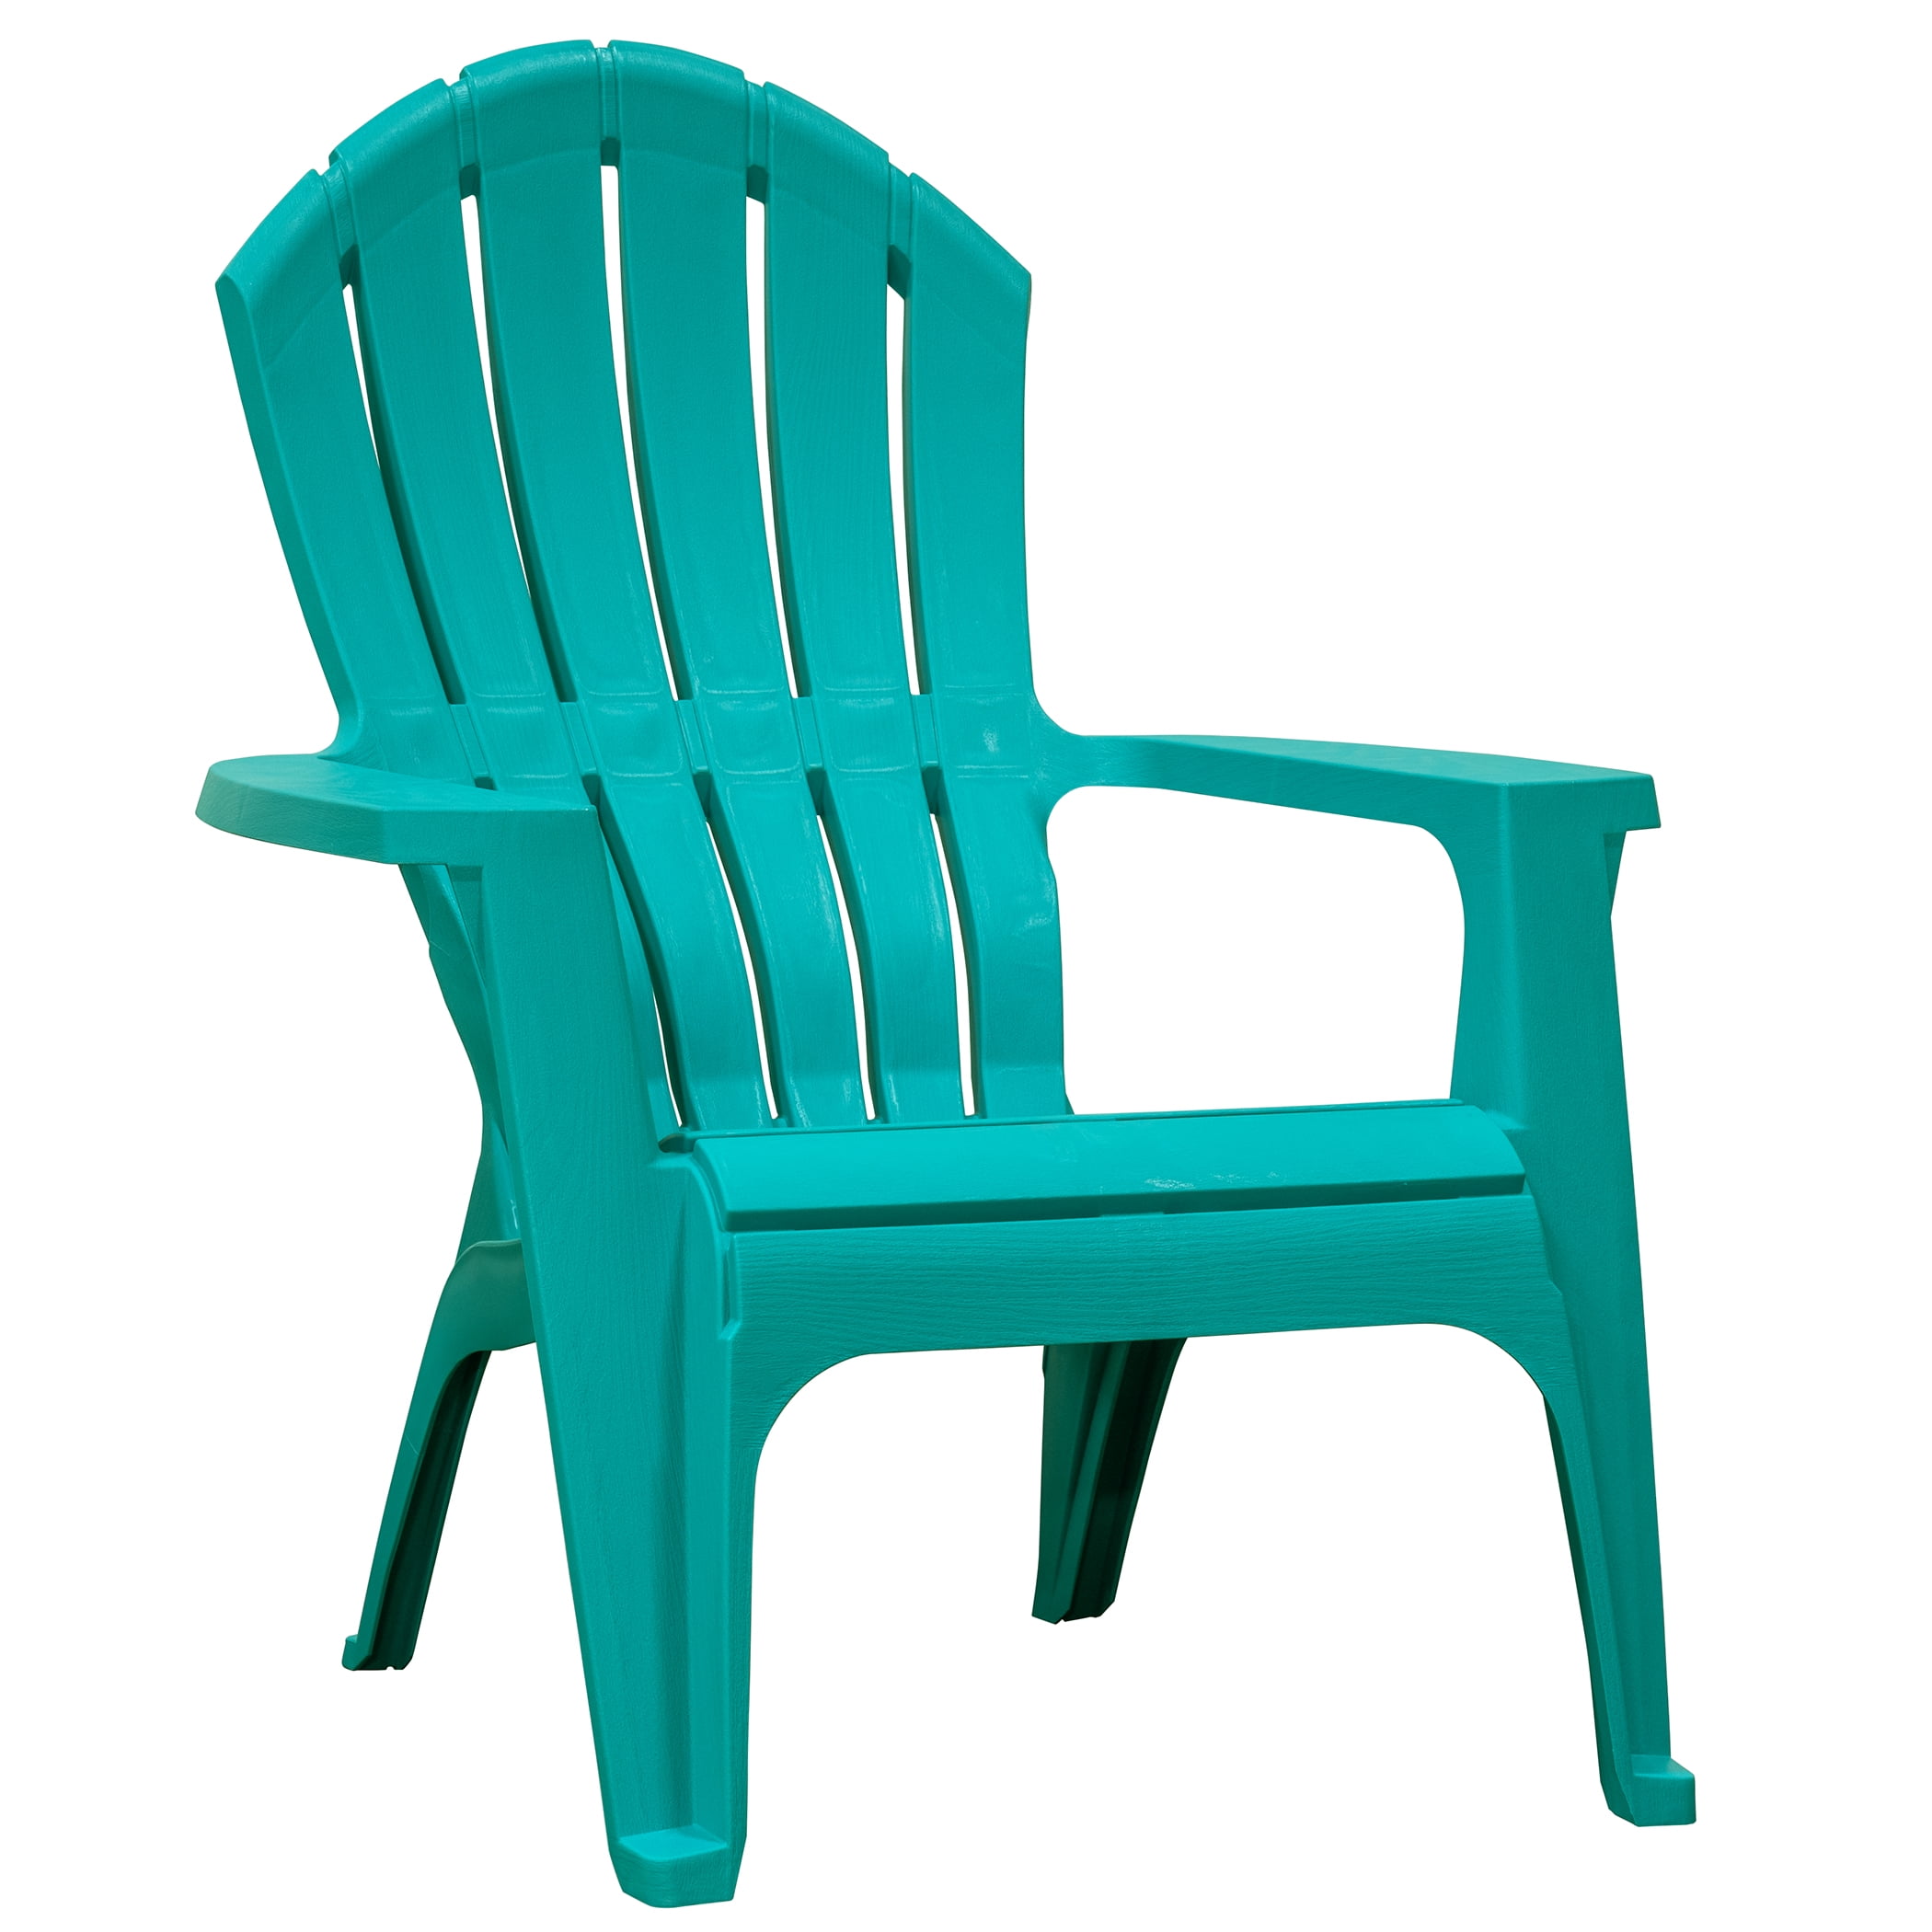 Real Comfort Outdoor Resin Stackable Adirondack Chair, Teal